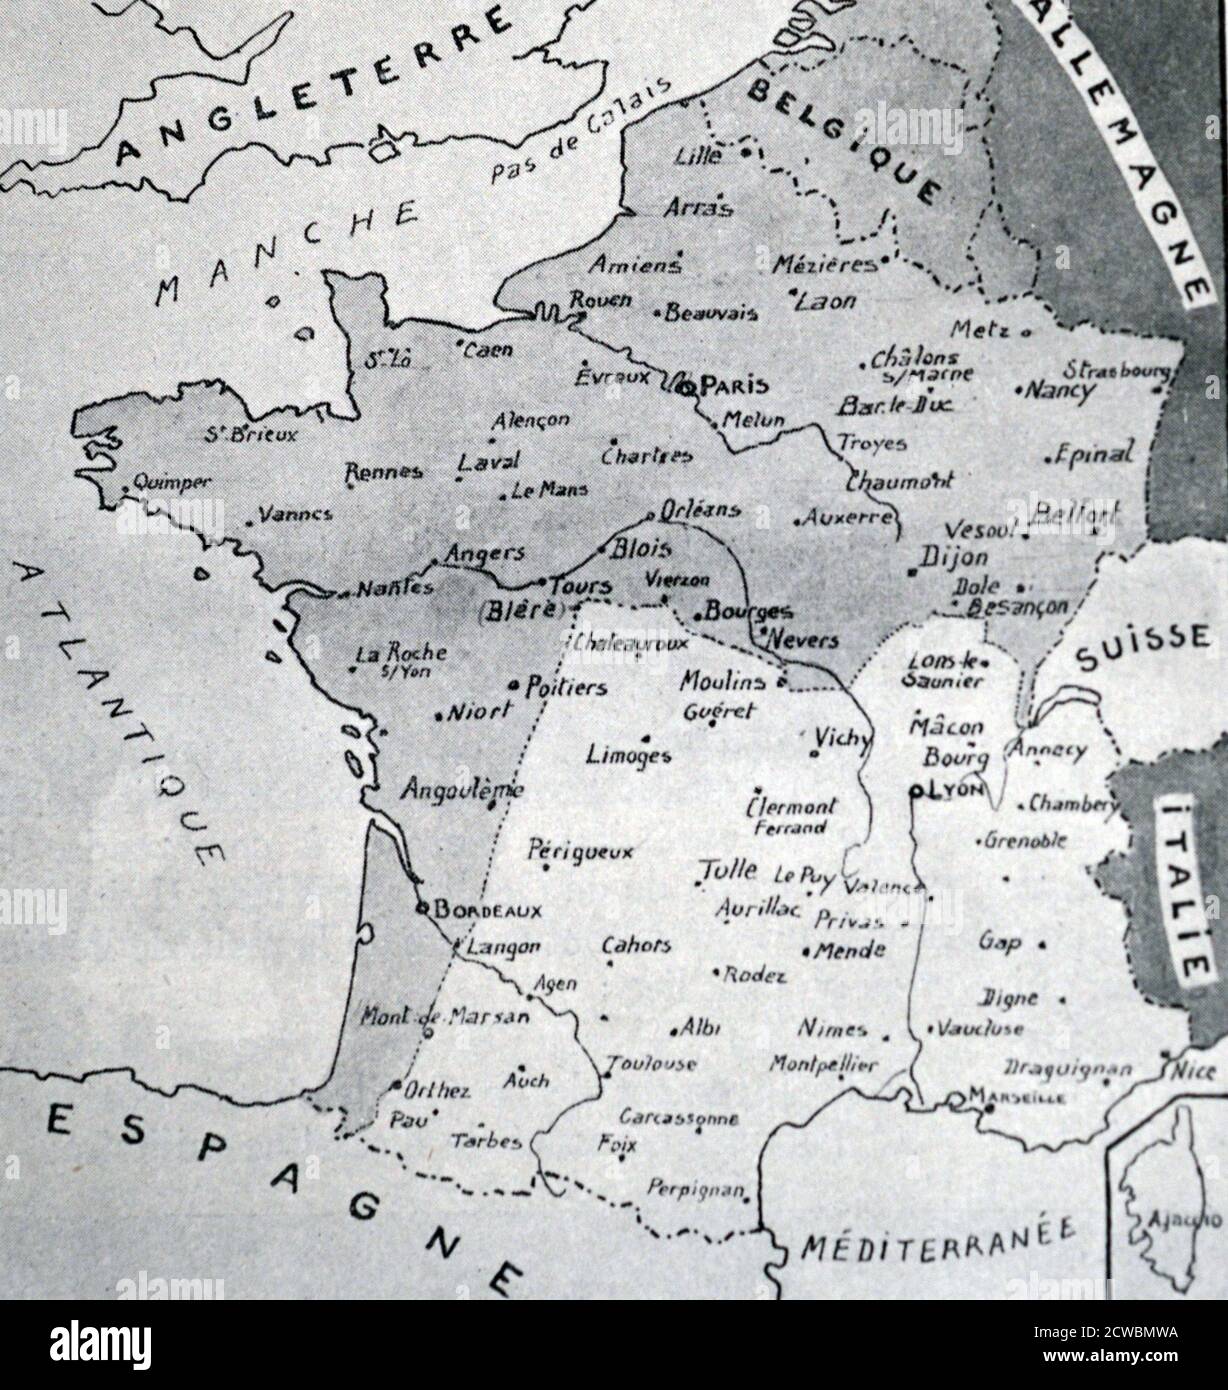 Wwii Map Of France - Alvera Marcille